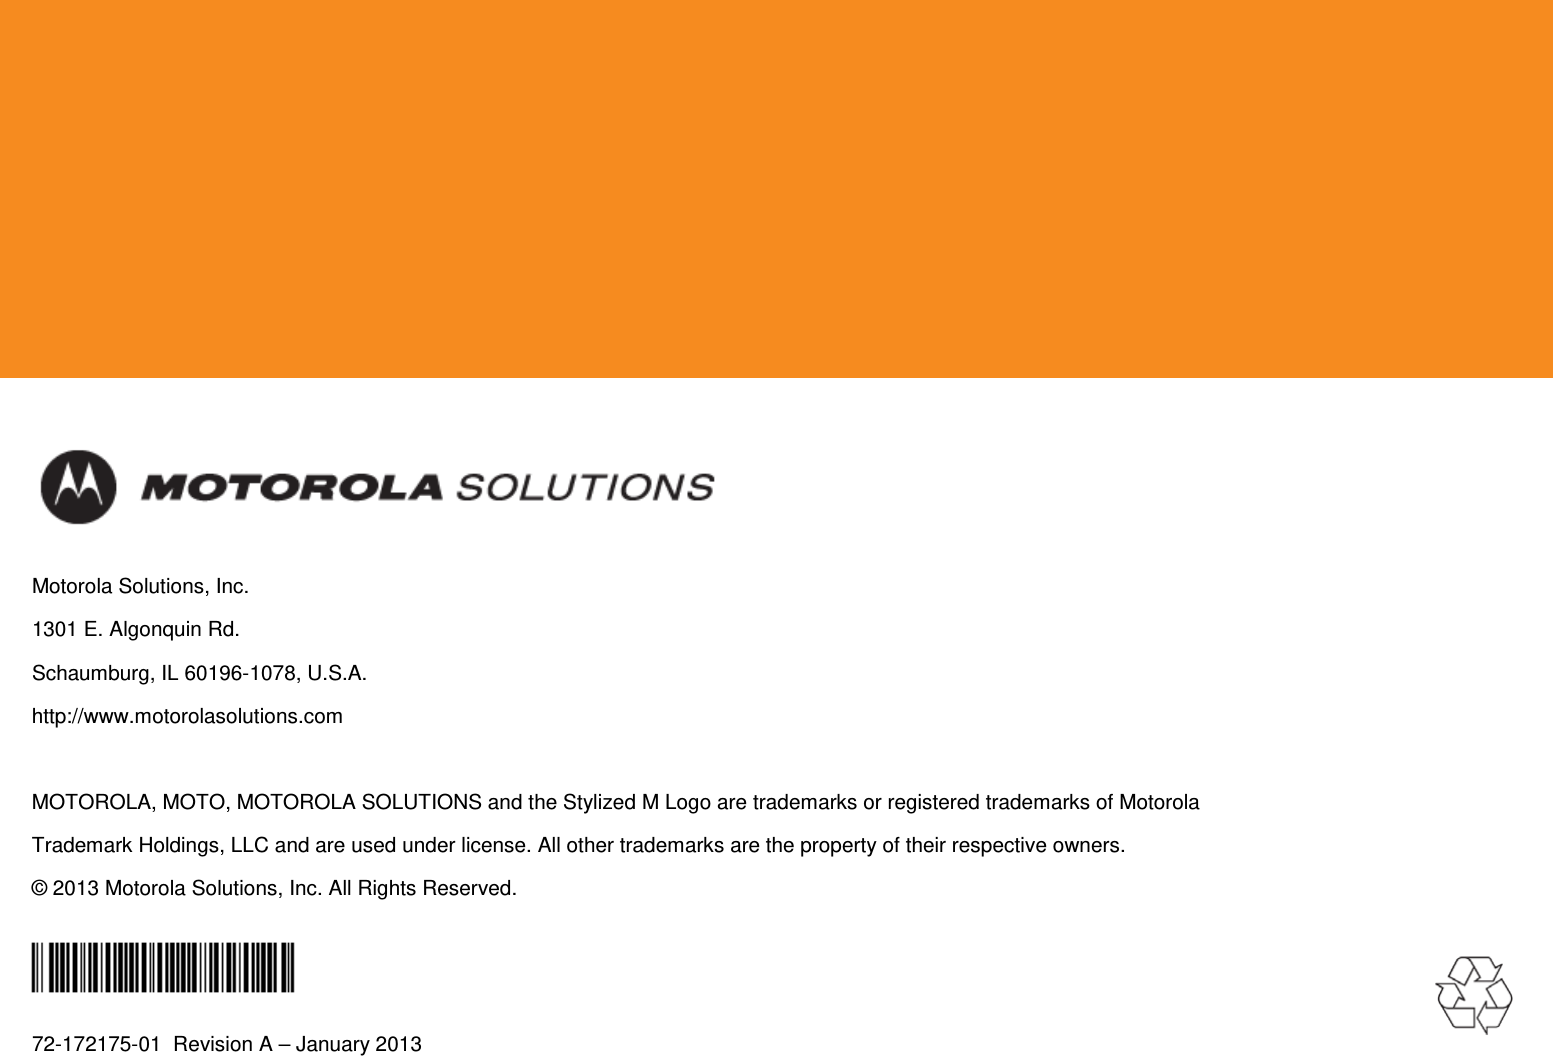            Motorola Solutions, Inc. 1301 E. Algonquin Rd. Schaumburg, IL 60196-1078, U.S.A. http://www.motorolasolutions.com  MOTOROLA, MOTO, MOTOROLA SOLUTIONS and the Stylized M Logo are trademarks or registered trademarks of Motorola Trademark Holdings, LLC and are used under license. All other trademarks are the property of their respective owners. © 2013 Motorola Solutions, Inc. All Rights Reserved.  72-172175-01  Revision A – January 2013  